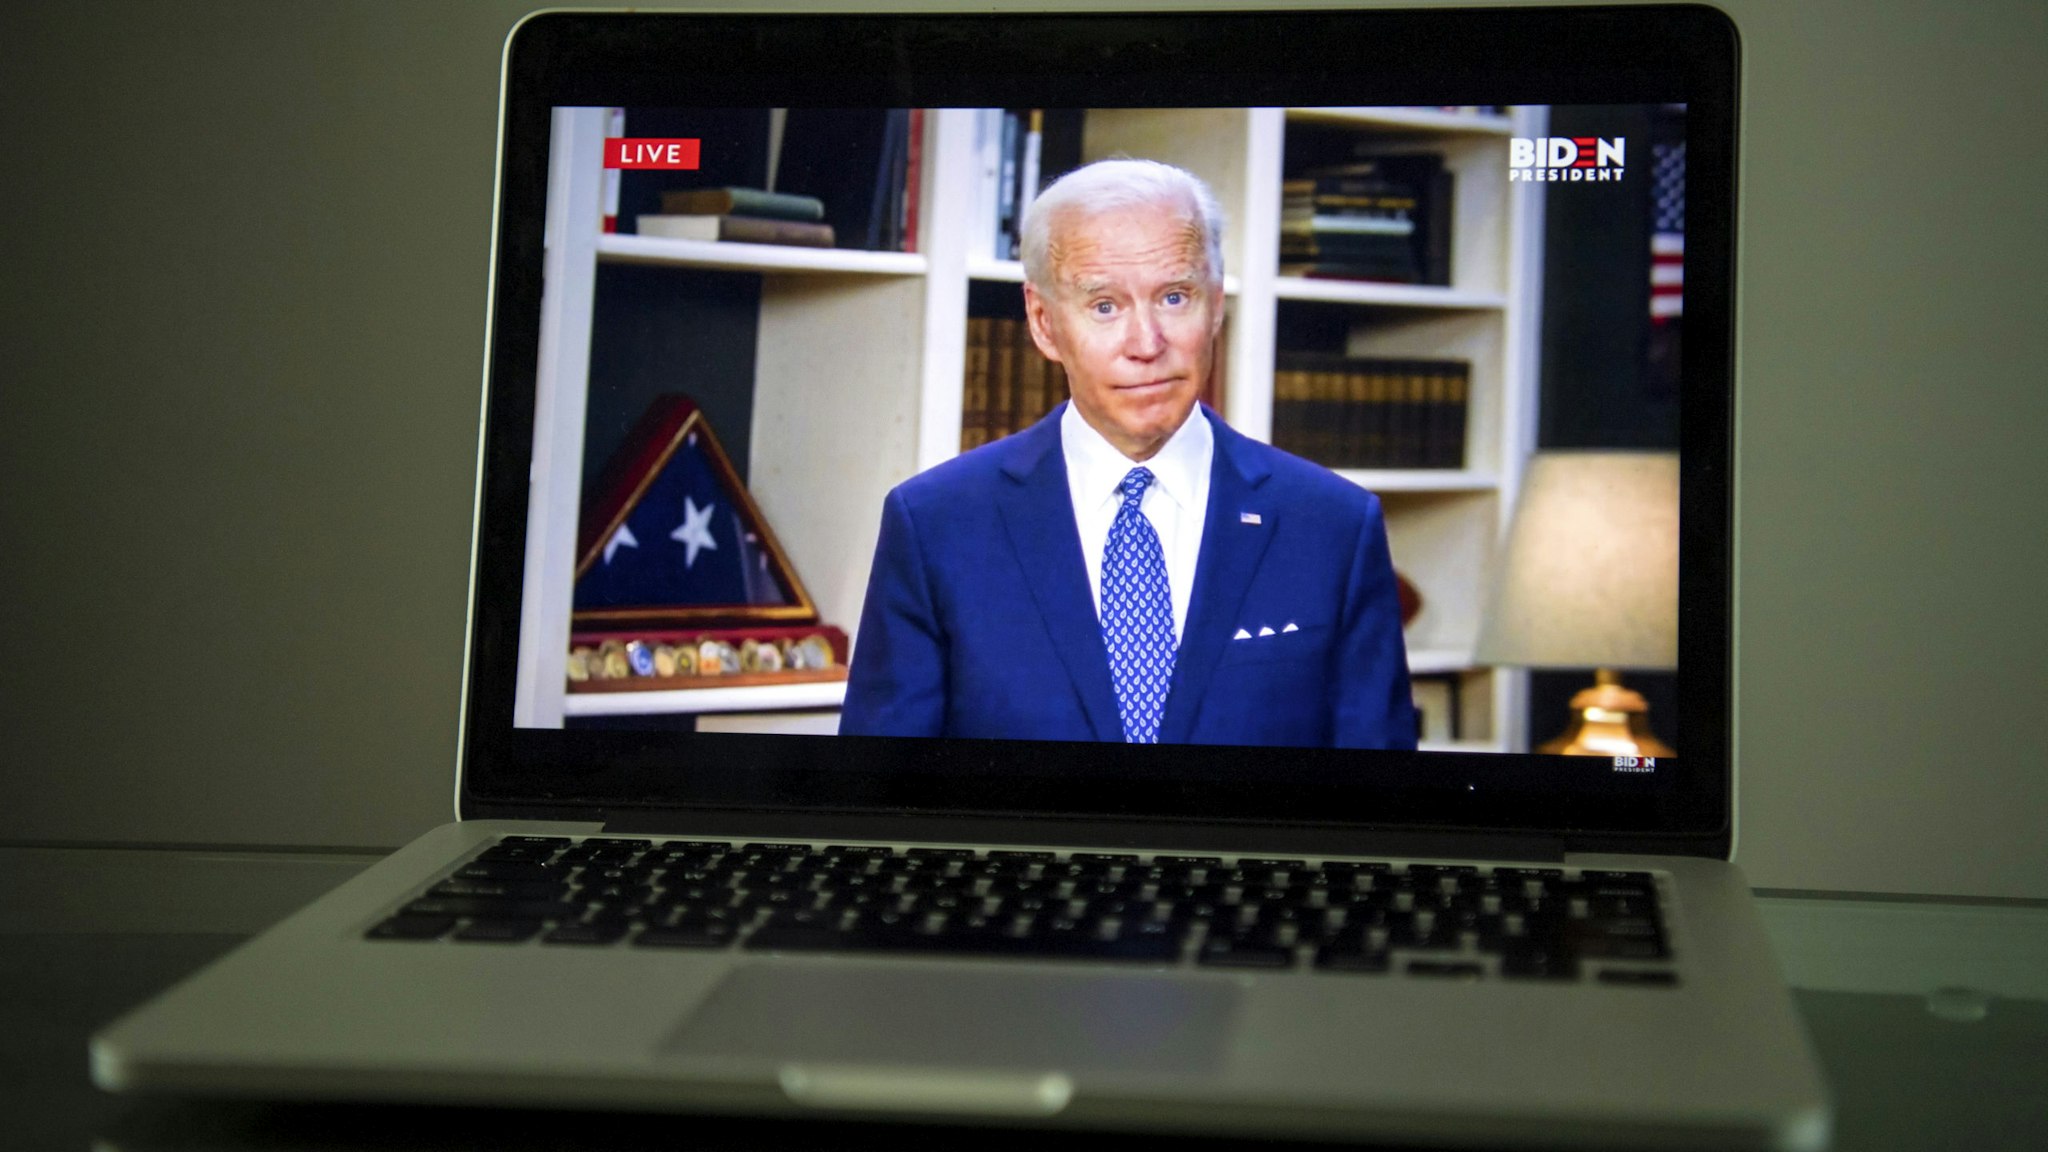 WASHINGTON, DC - MAY 29: Former Vice President Joe Biden speaks from his home about George Floyd's death and the protests in Minnesota as seen livestreaming on a laptop in Washington, DC on May 29, 2020.